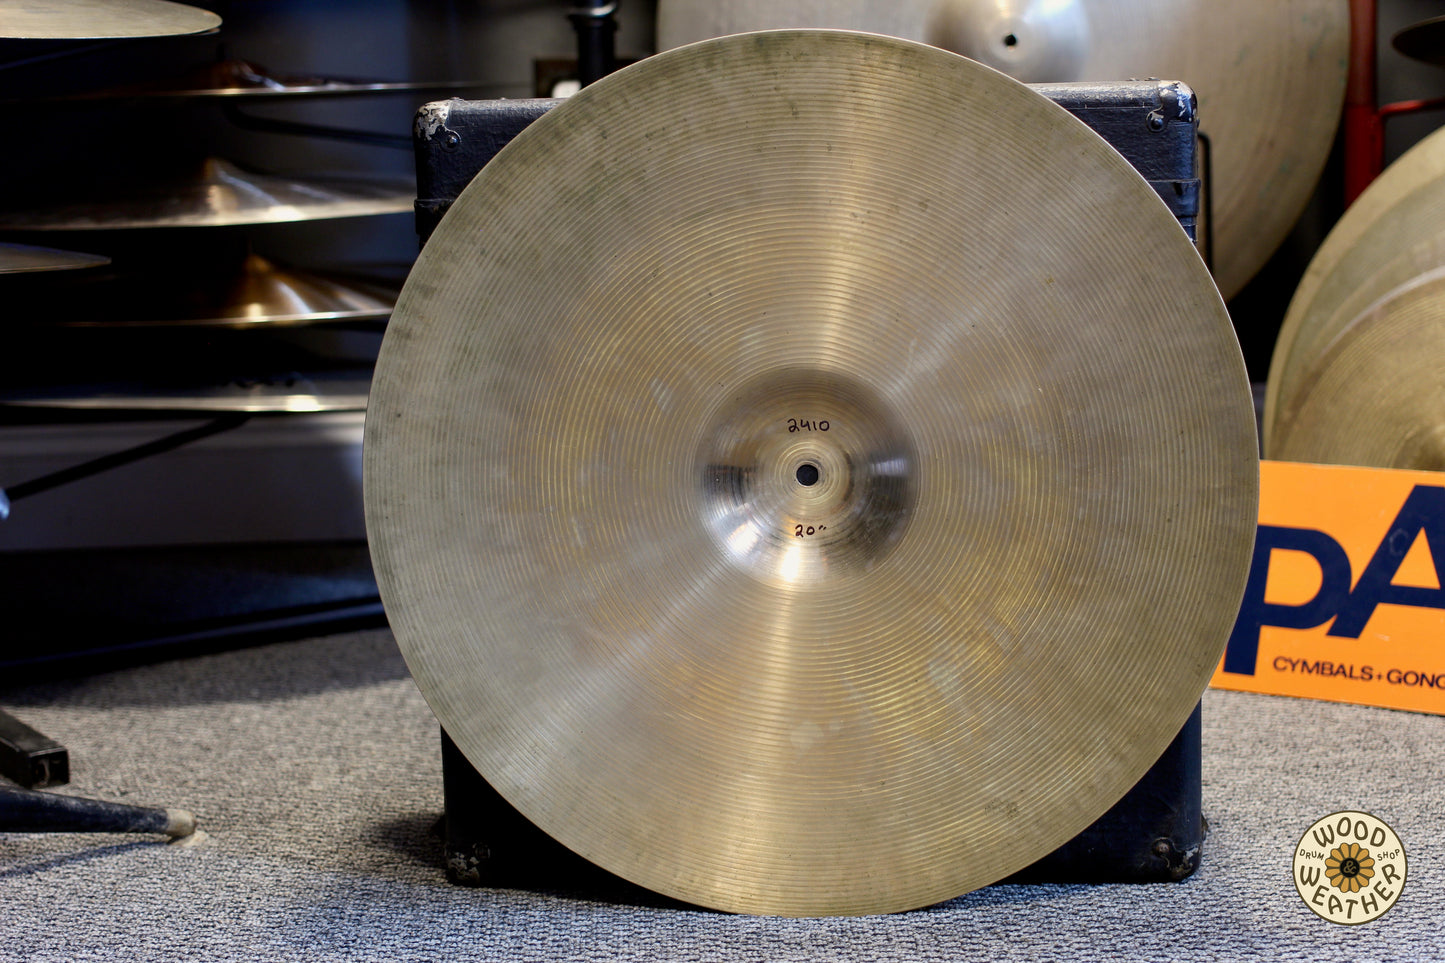 1960s Paiste 20" Formula 602 "Solid Stamp" Ride Cymbal 2410g